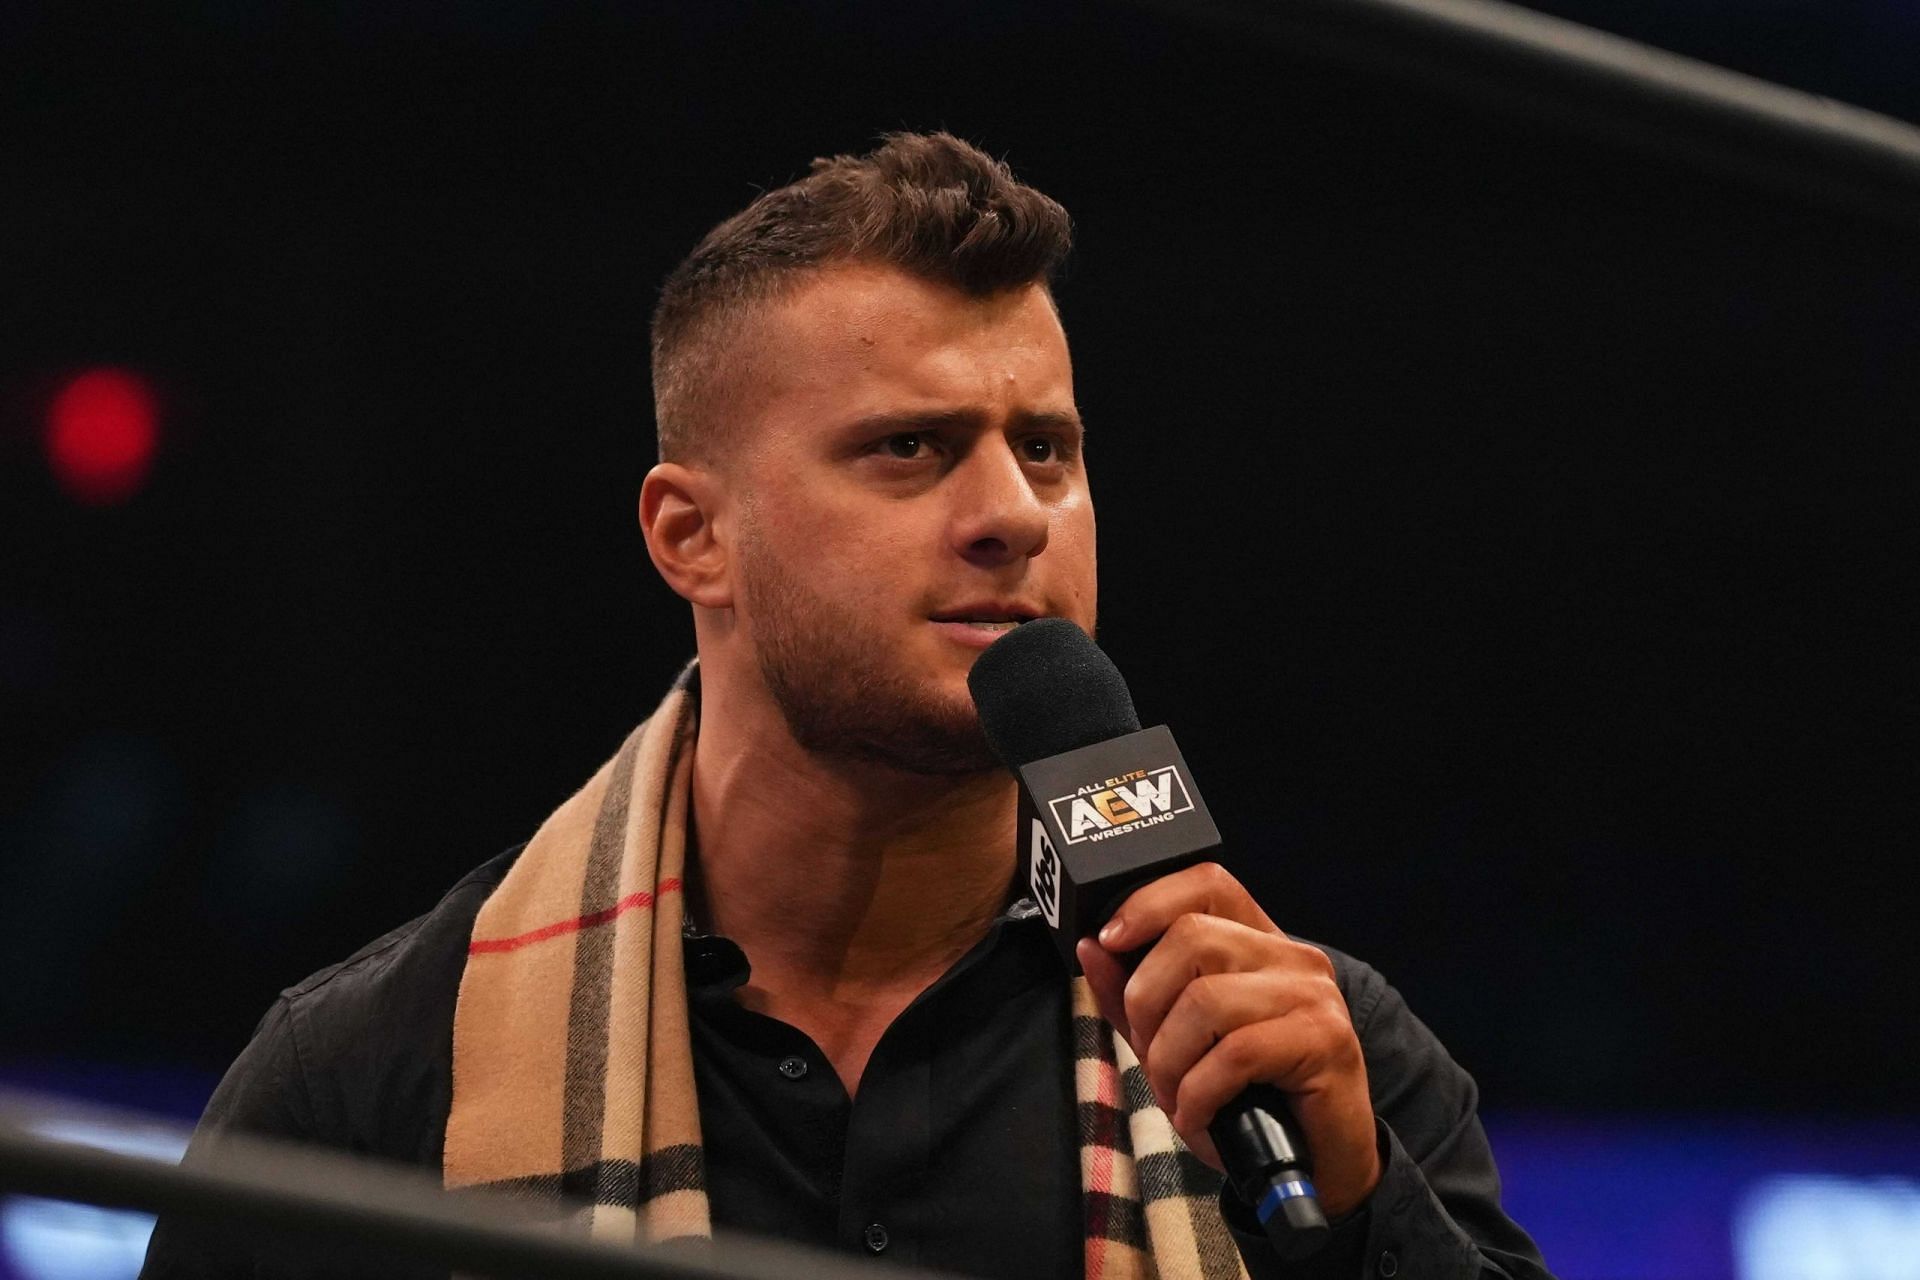 Maxwell Jacob Friedman (MJF) will face Wardlow at AEW Double or Nothing 2022.